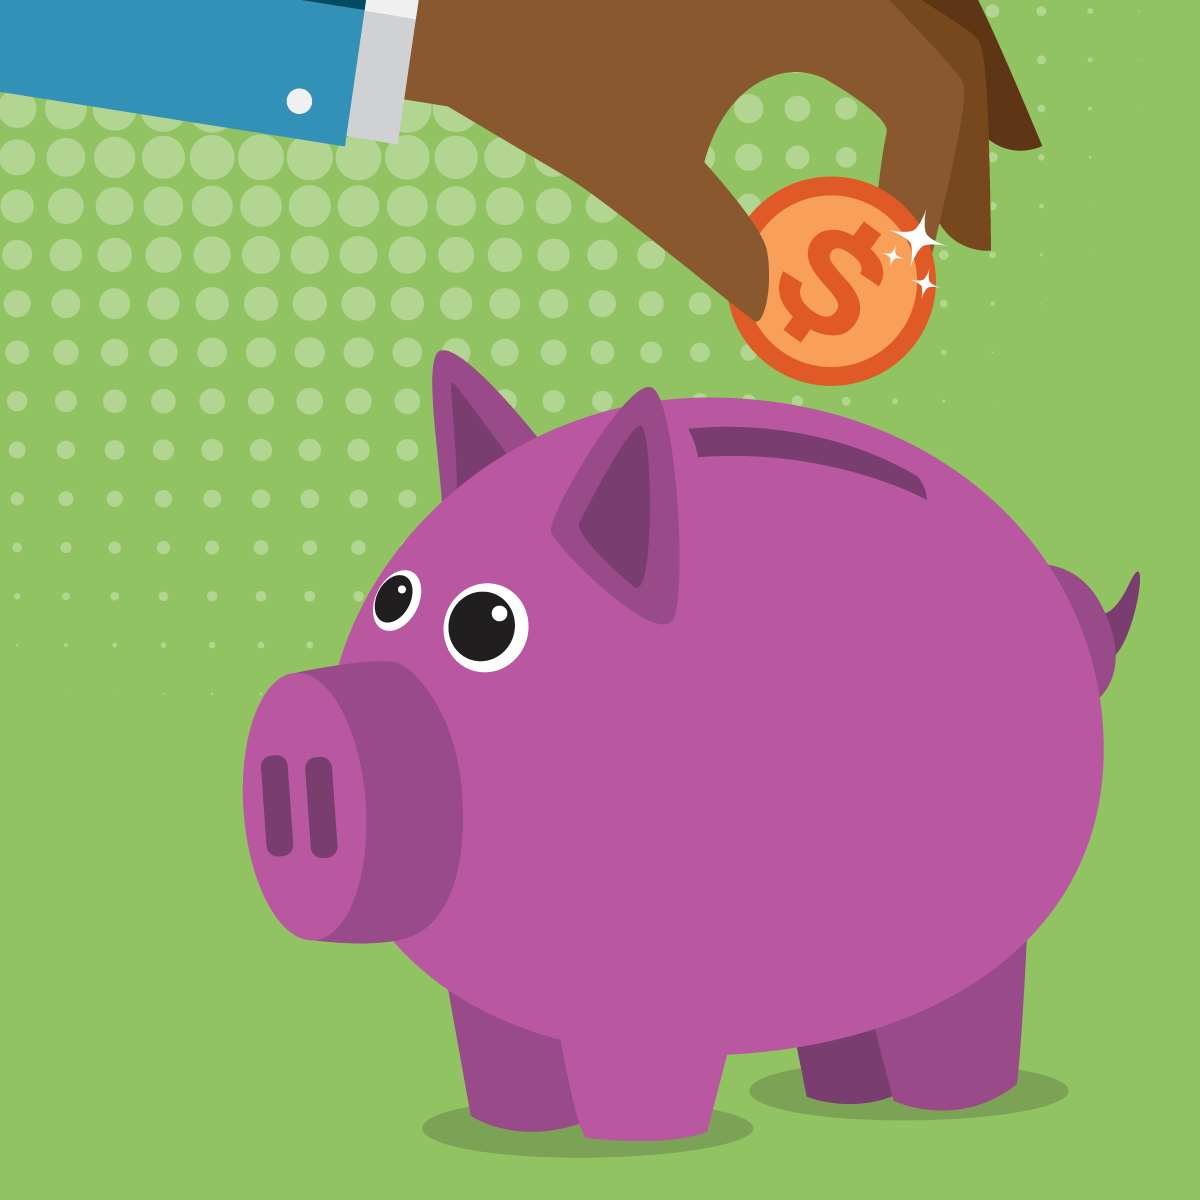 Graphic showing a coin being put into a piggy bank